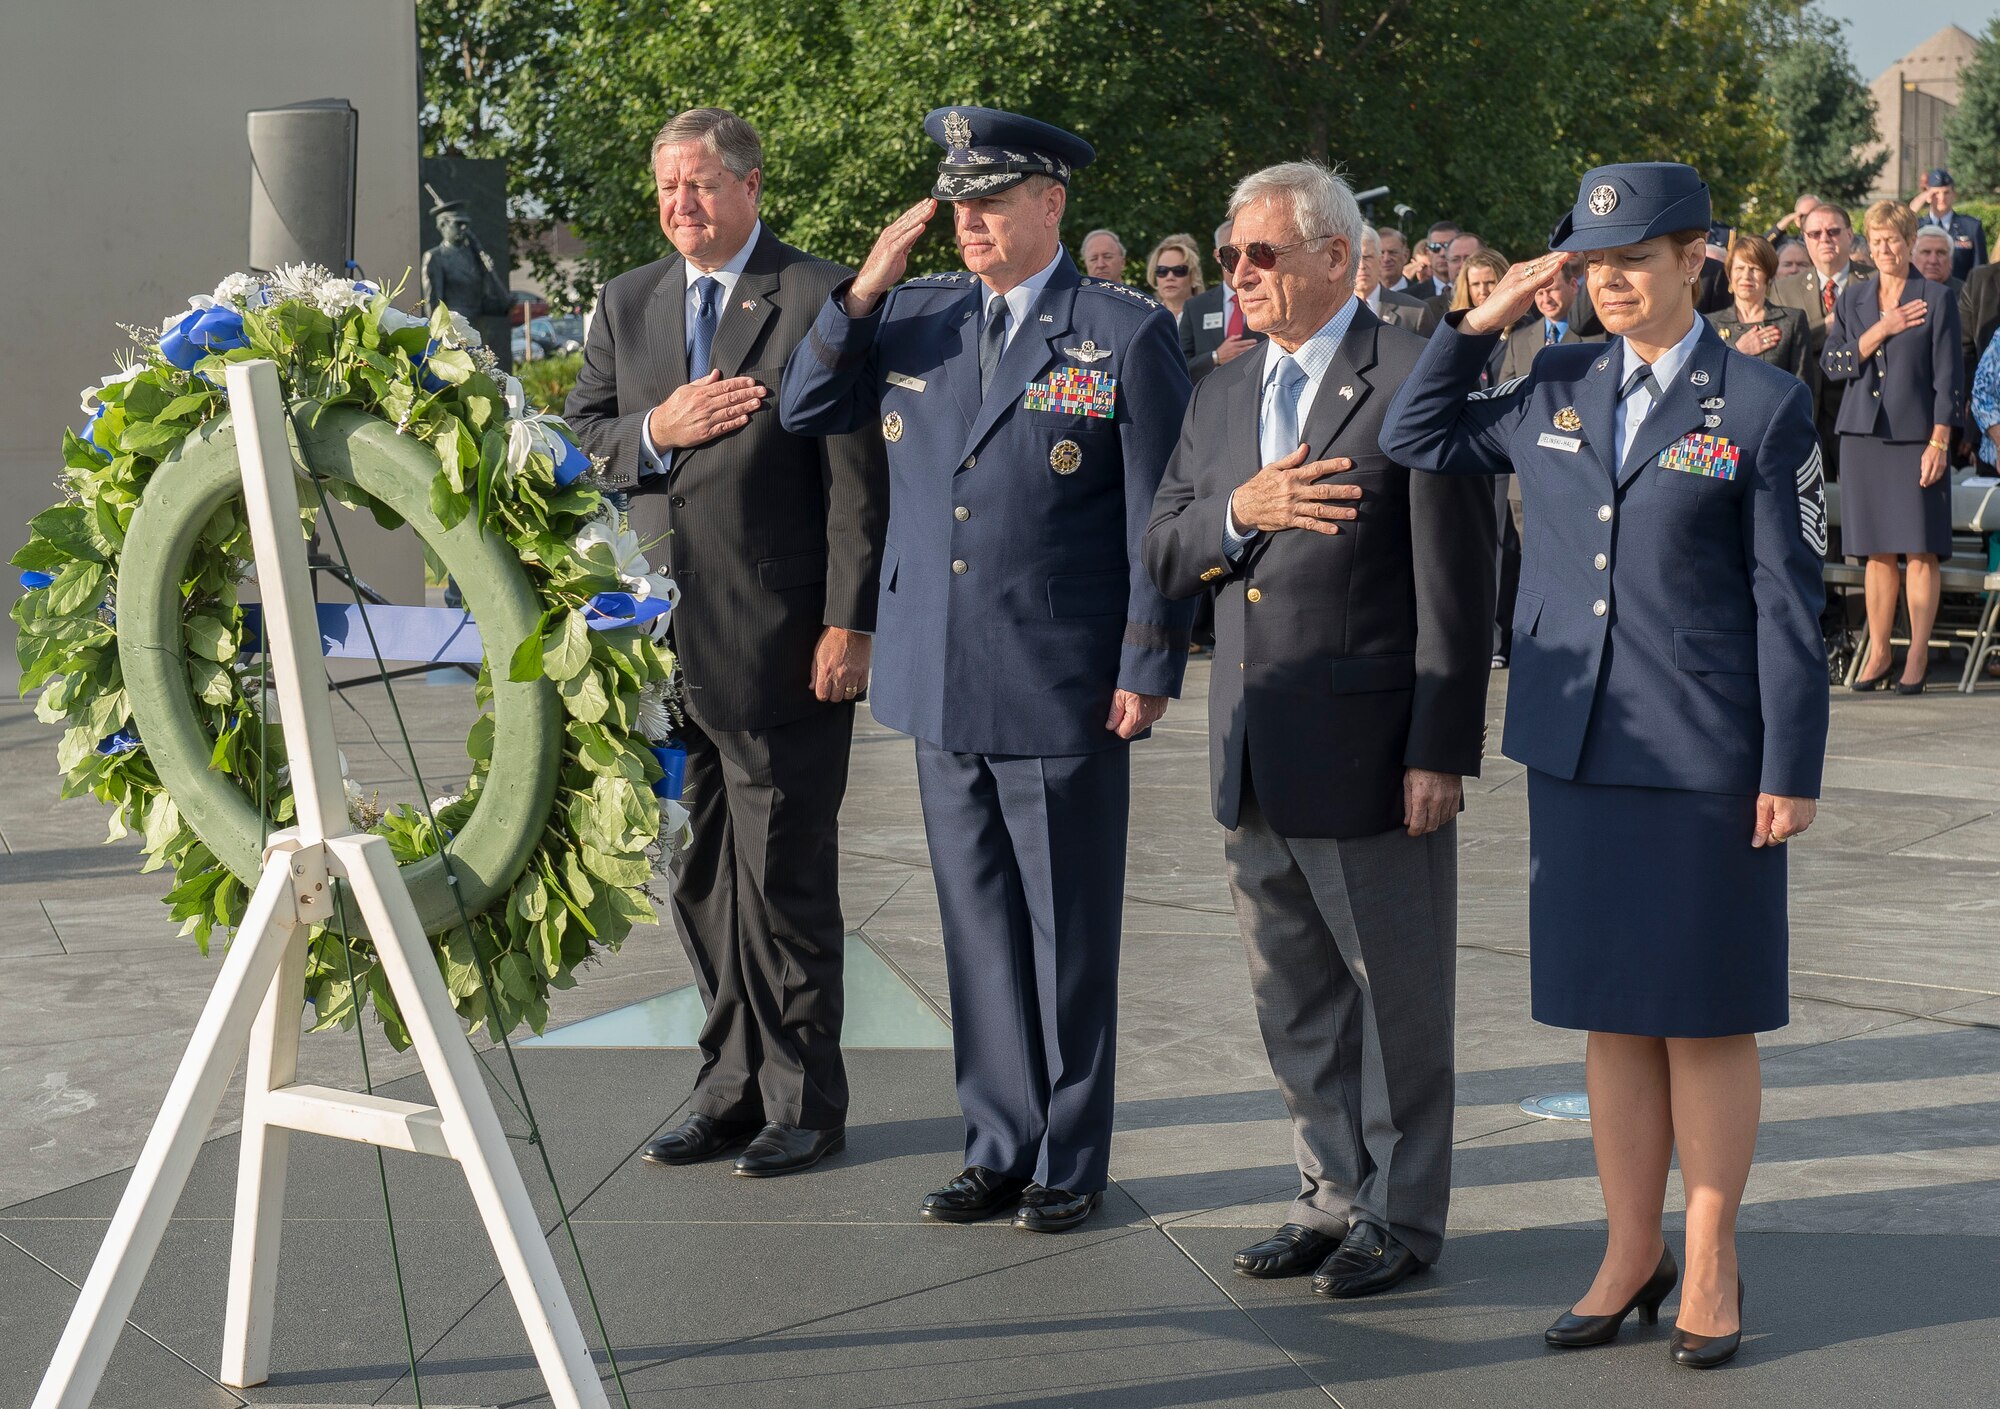 From the left: Secretary of the Air Force Michael Donley, Air Force Chief of Staff Gen. Mark A. Welsh III, Air Force Association Chairman of the Board S.Sanford Schlitt and the Senior Enlisted Leader to the Chief, National Guard Bureau Chief Master Sgt.  Denise Jelinski-Hall render honors during a wreath laying ceremony commemorating this year’s fallen AFA members at the Air Force Memorial in Arlington, Va., Sept. 16, 2012. (U.S. Air Force photo/Jim Varhegyi)